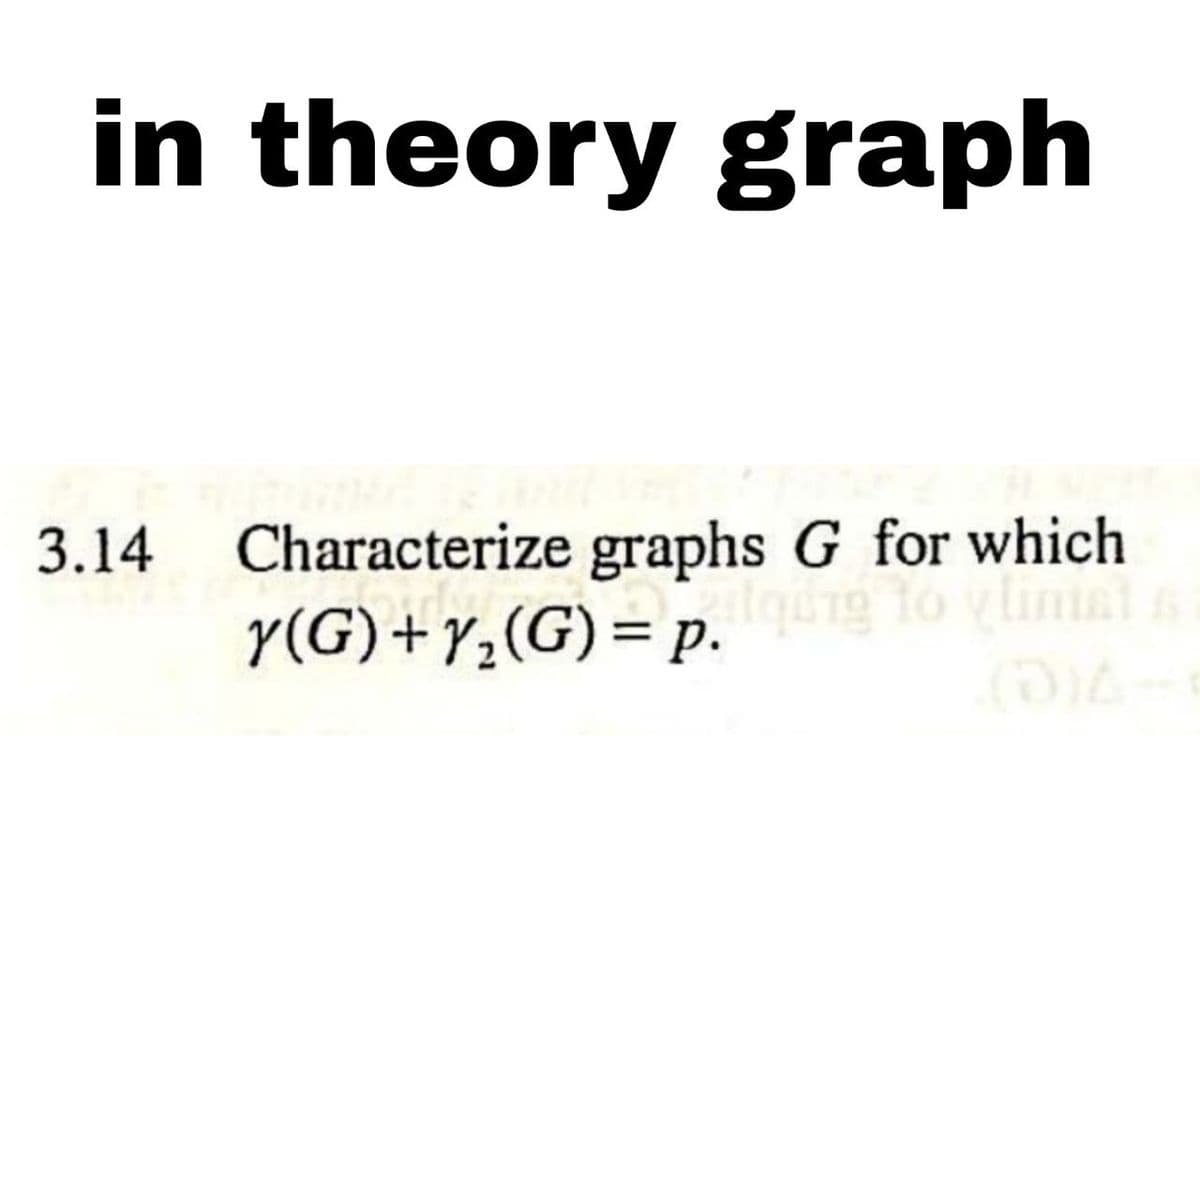 in theory graph
3.14 Characterize graphs G for which
igung to ylimat s
Y(G)+Y,(G)= p. que o